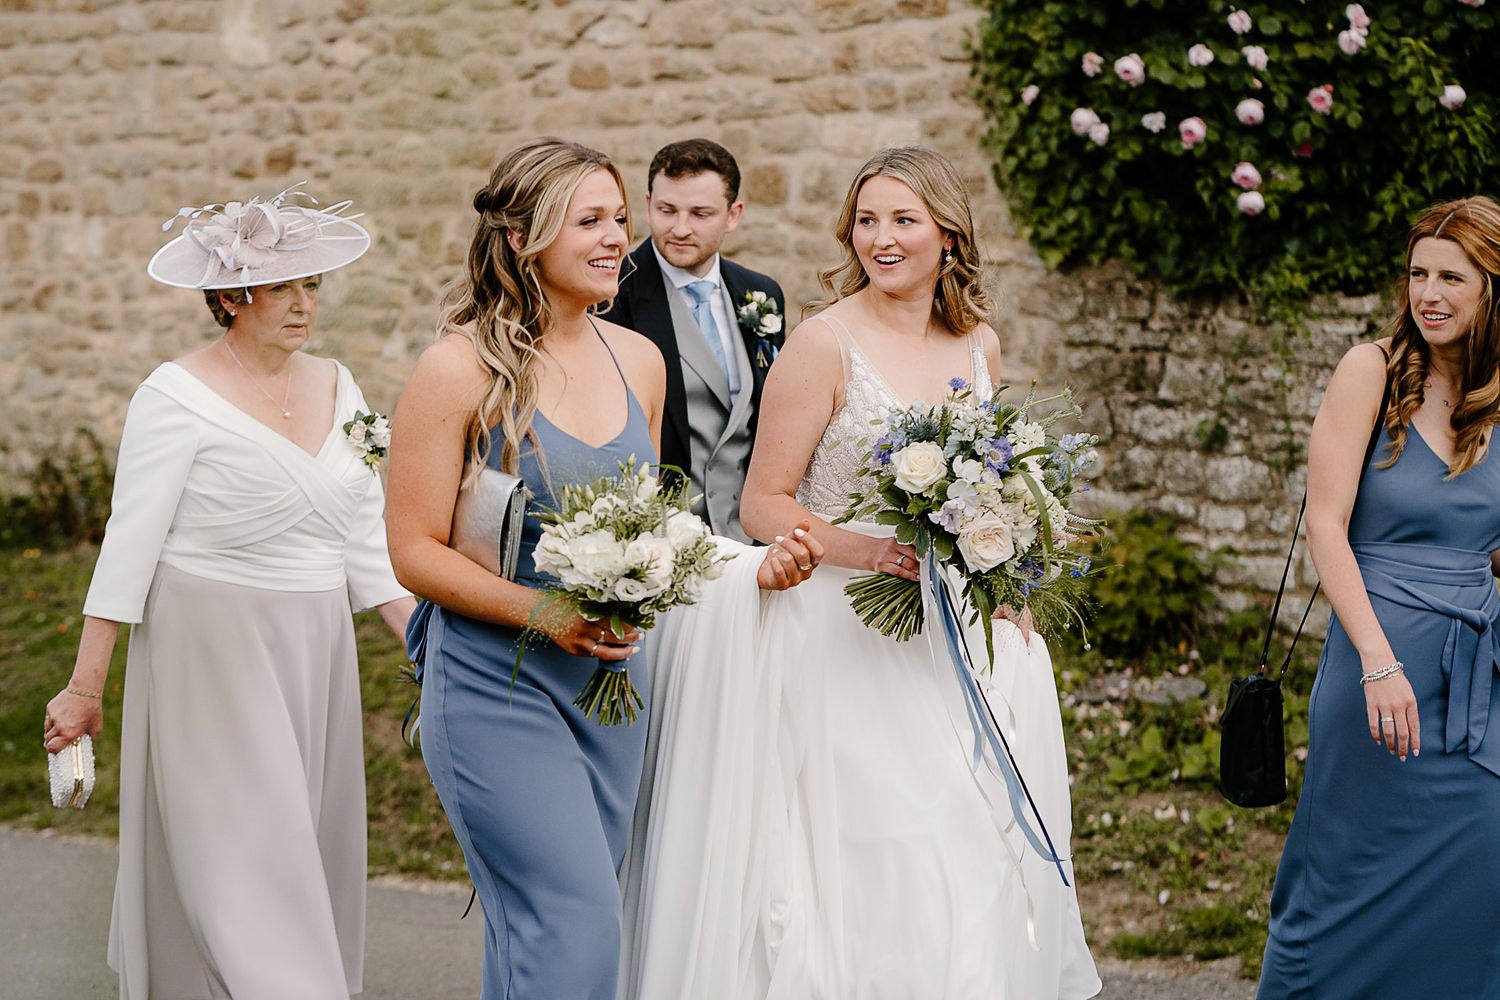 Oxfordshire and the cotswolds wedding photographer 2022 review119.jpg